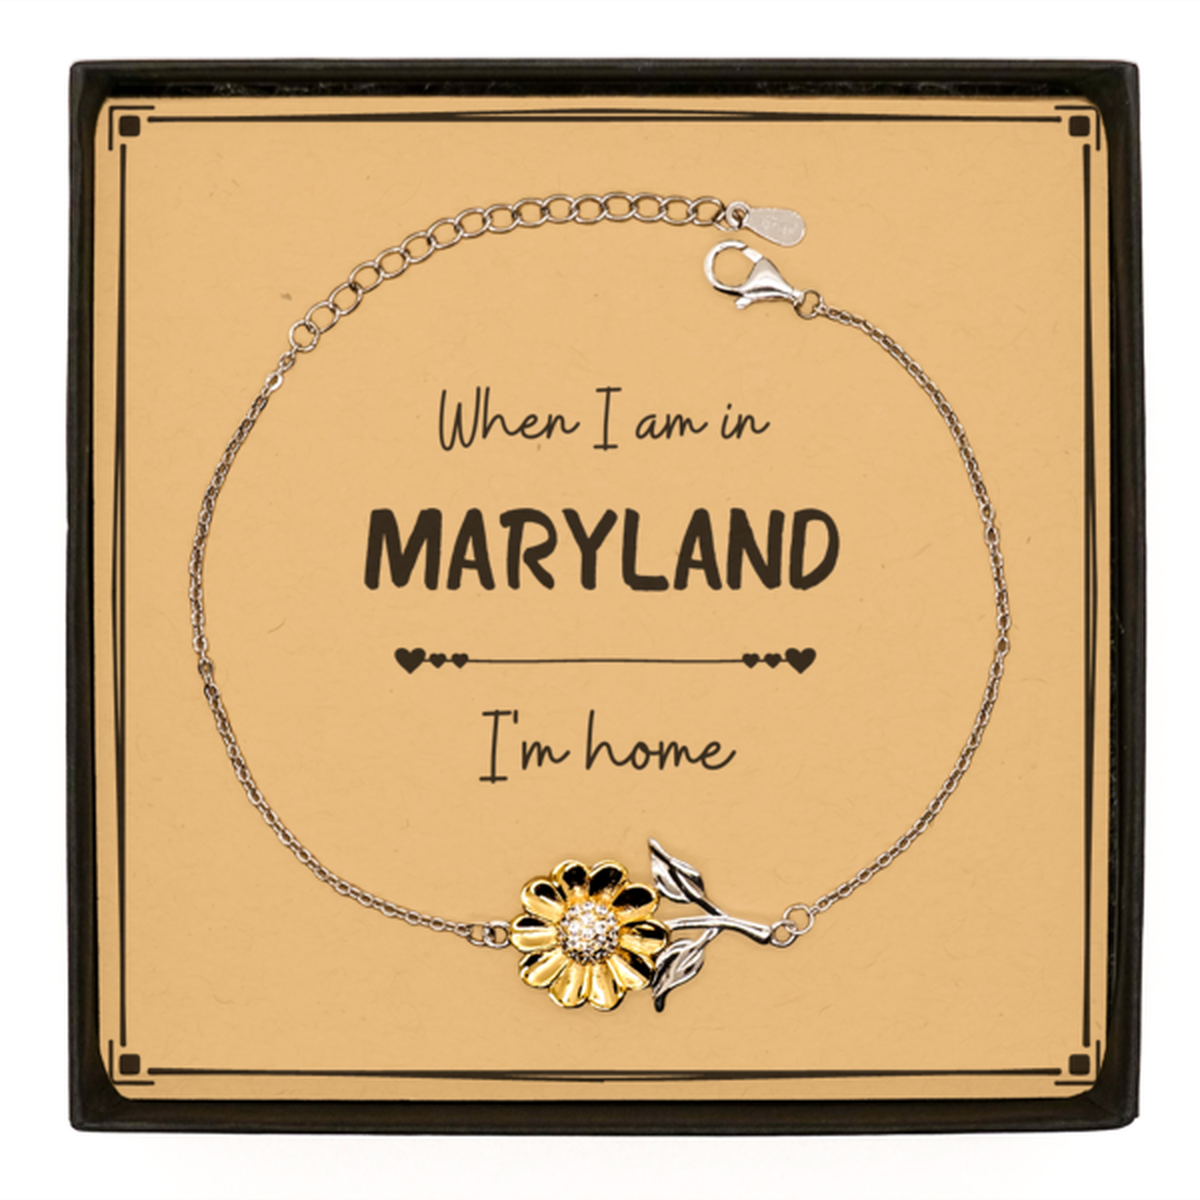 When I am in Maryland I'm home Sunflower Bracelet, Message Card Gifts For Maryland, State Maryland Birthday Gifts for Friends Coworker